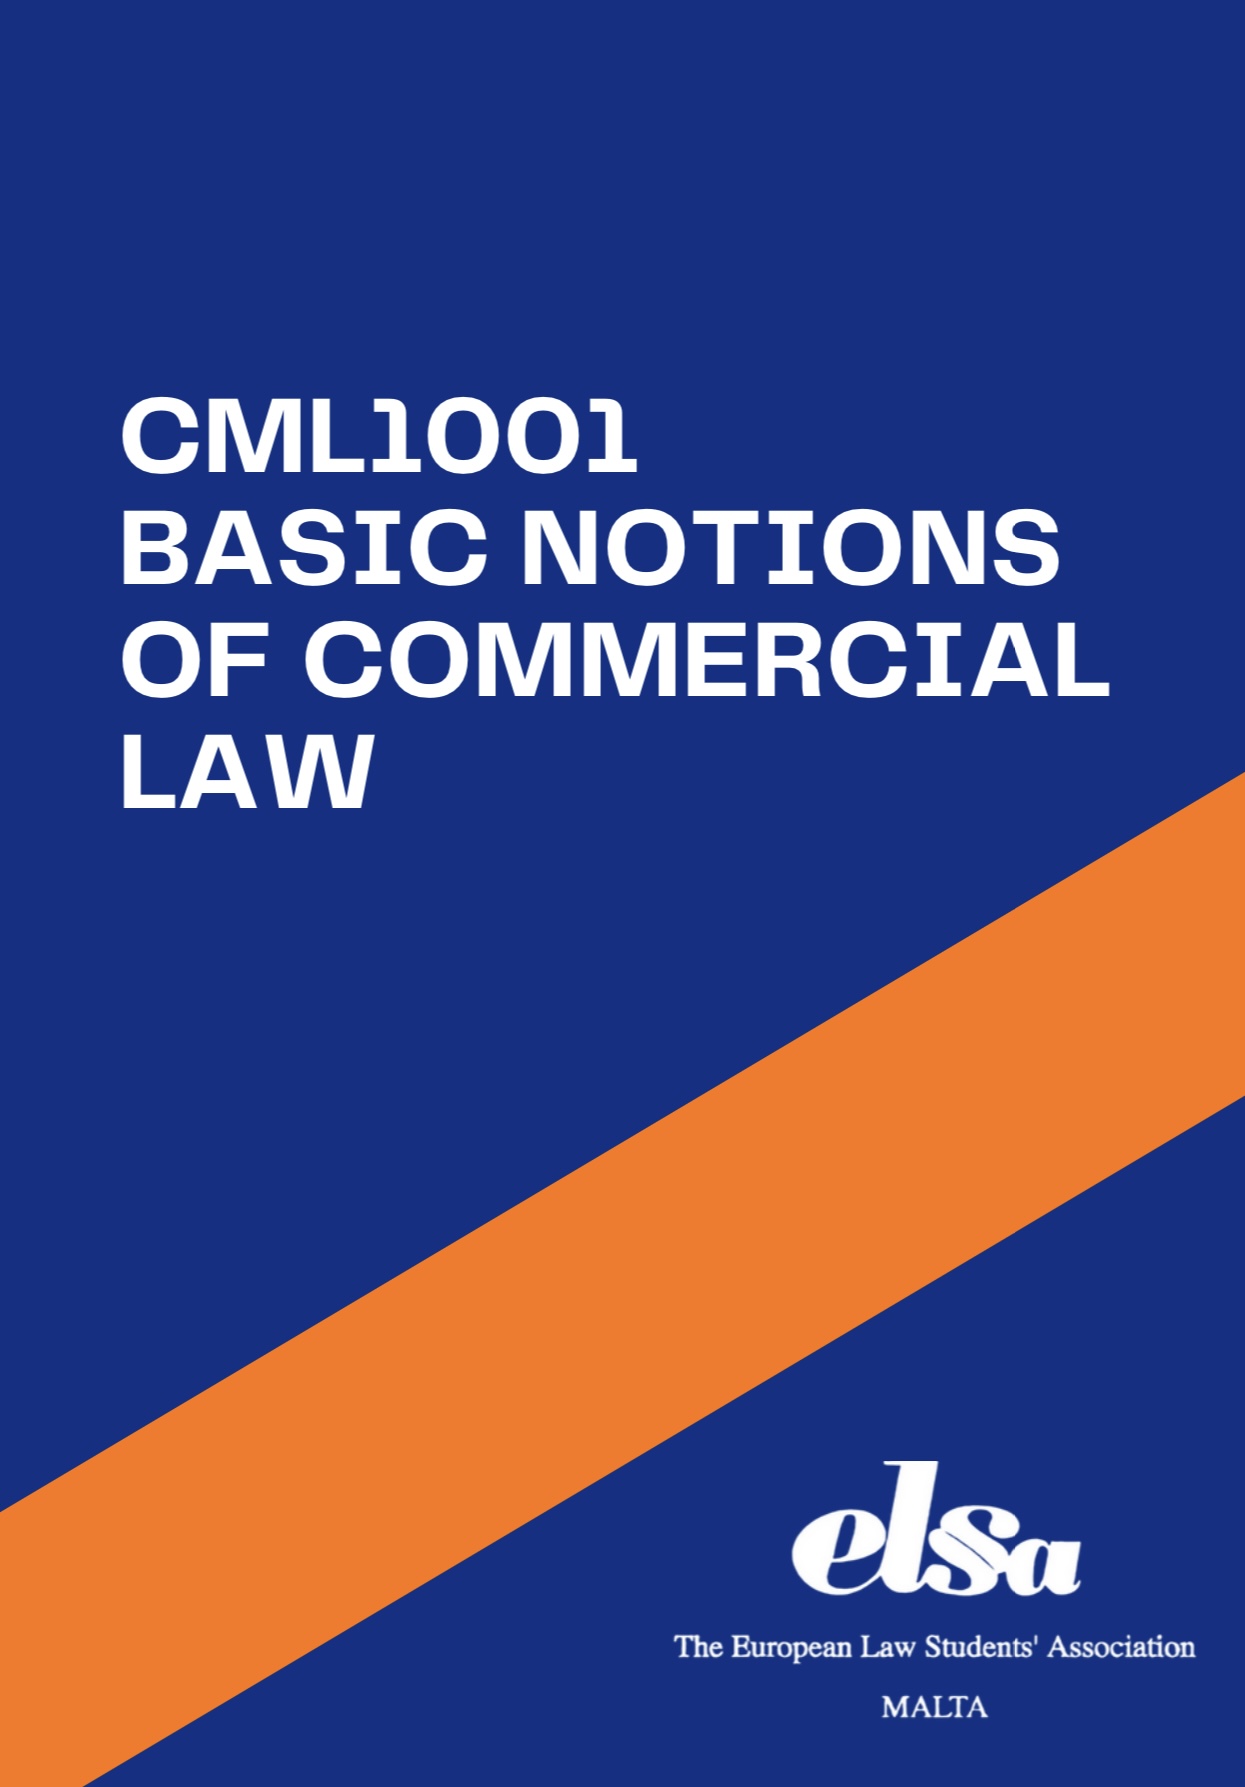 CML1001 - Basic Notions of Commercial Law